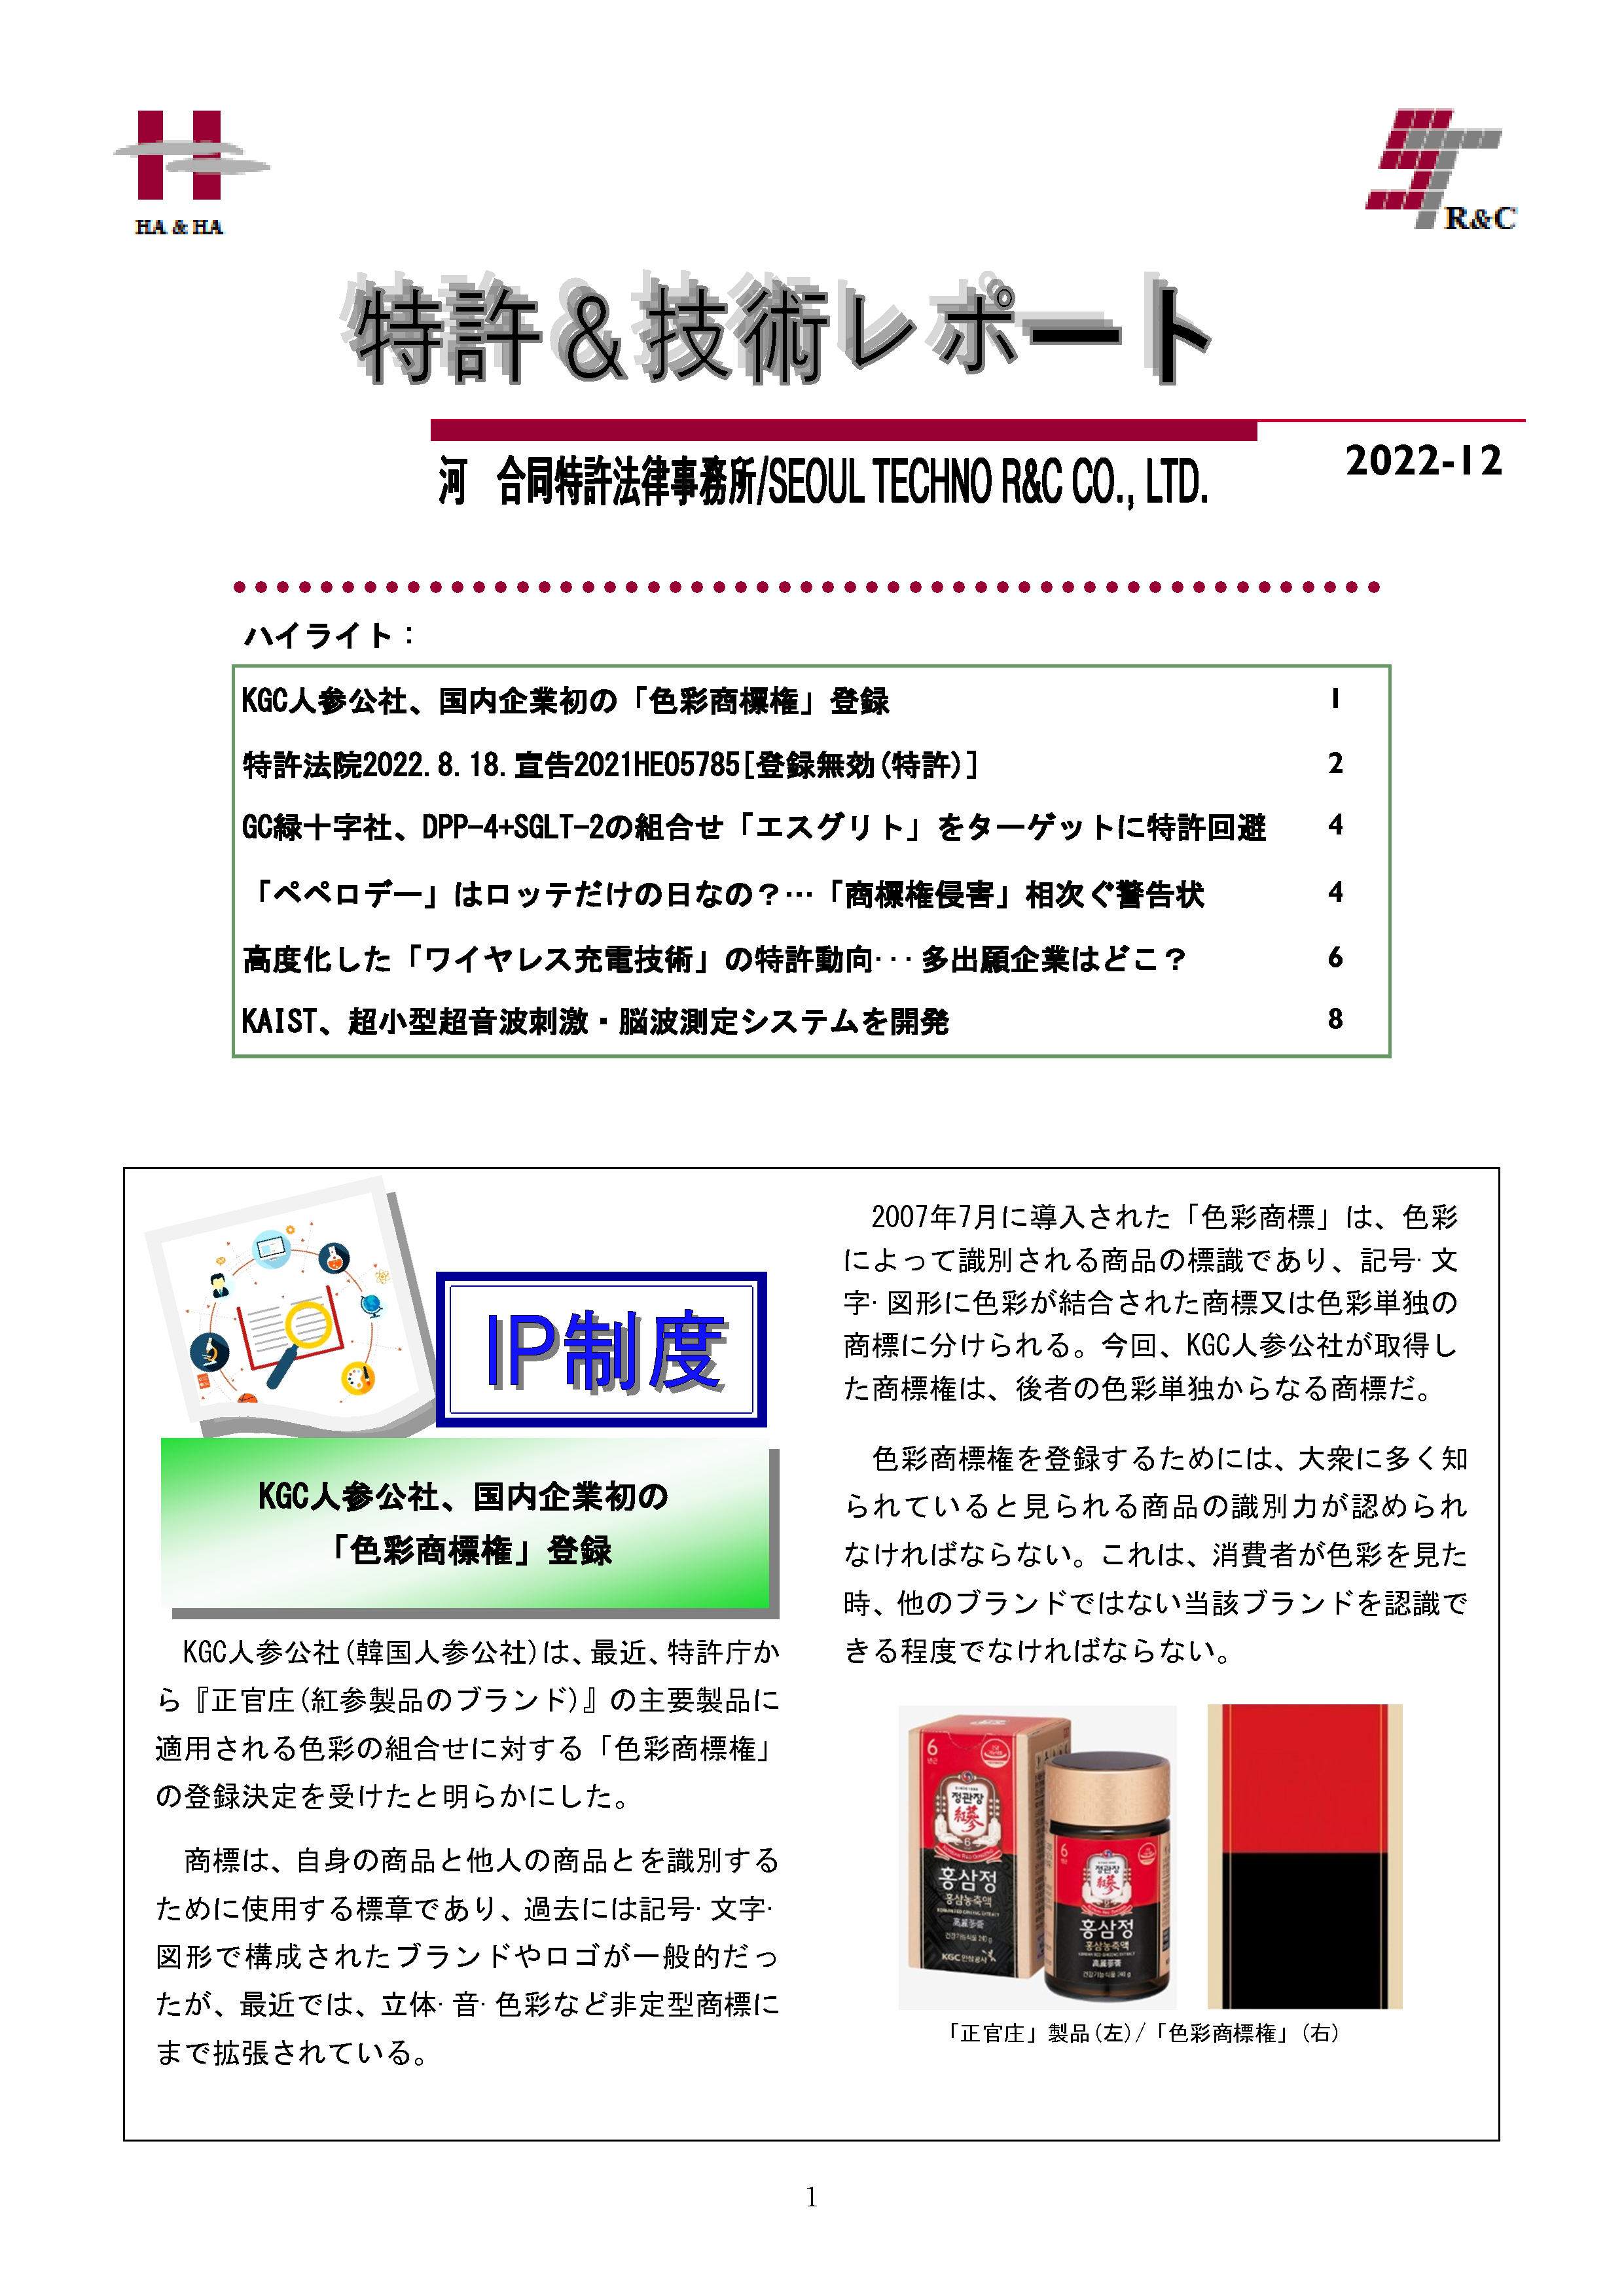 Newsletter_202212_1.png